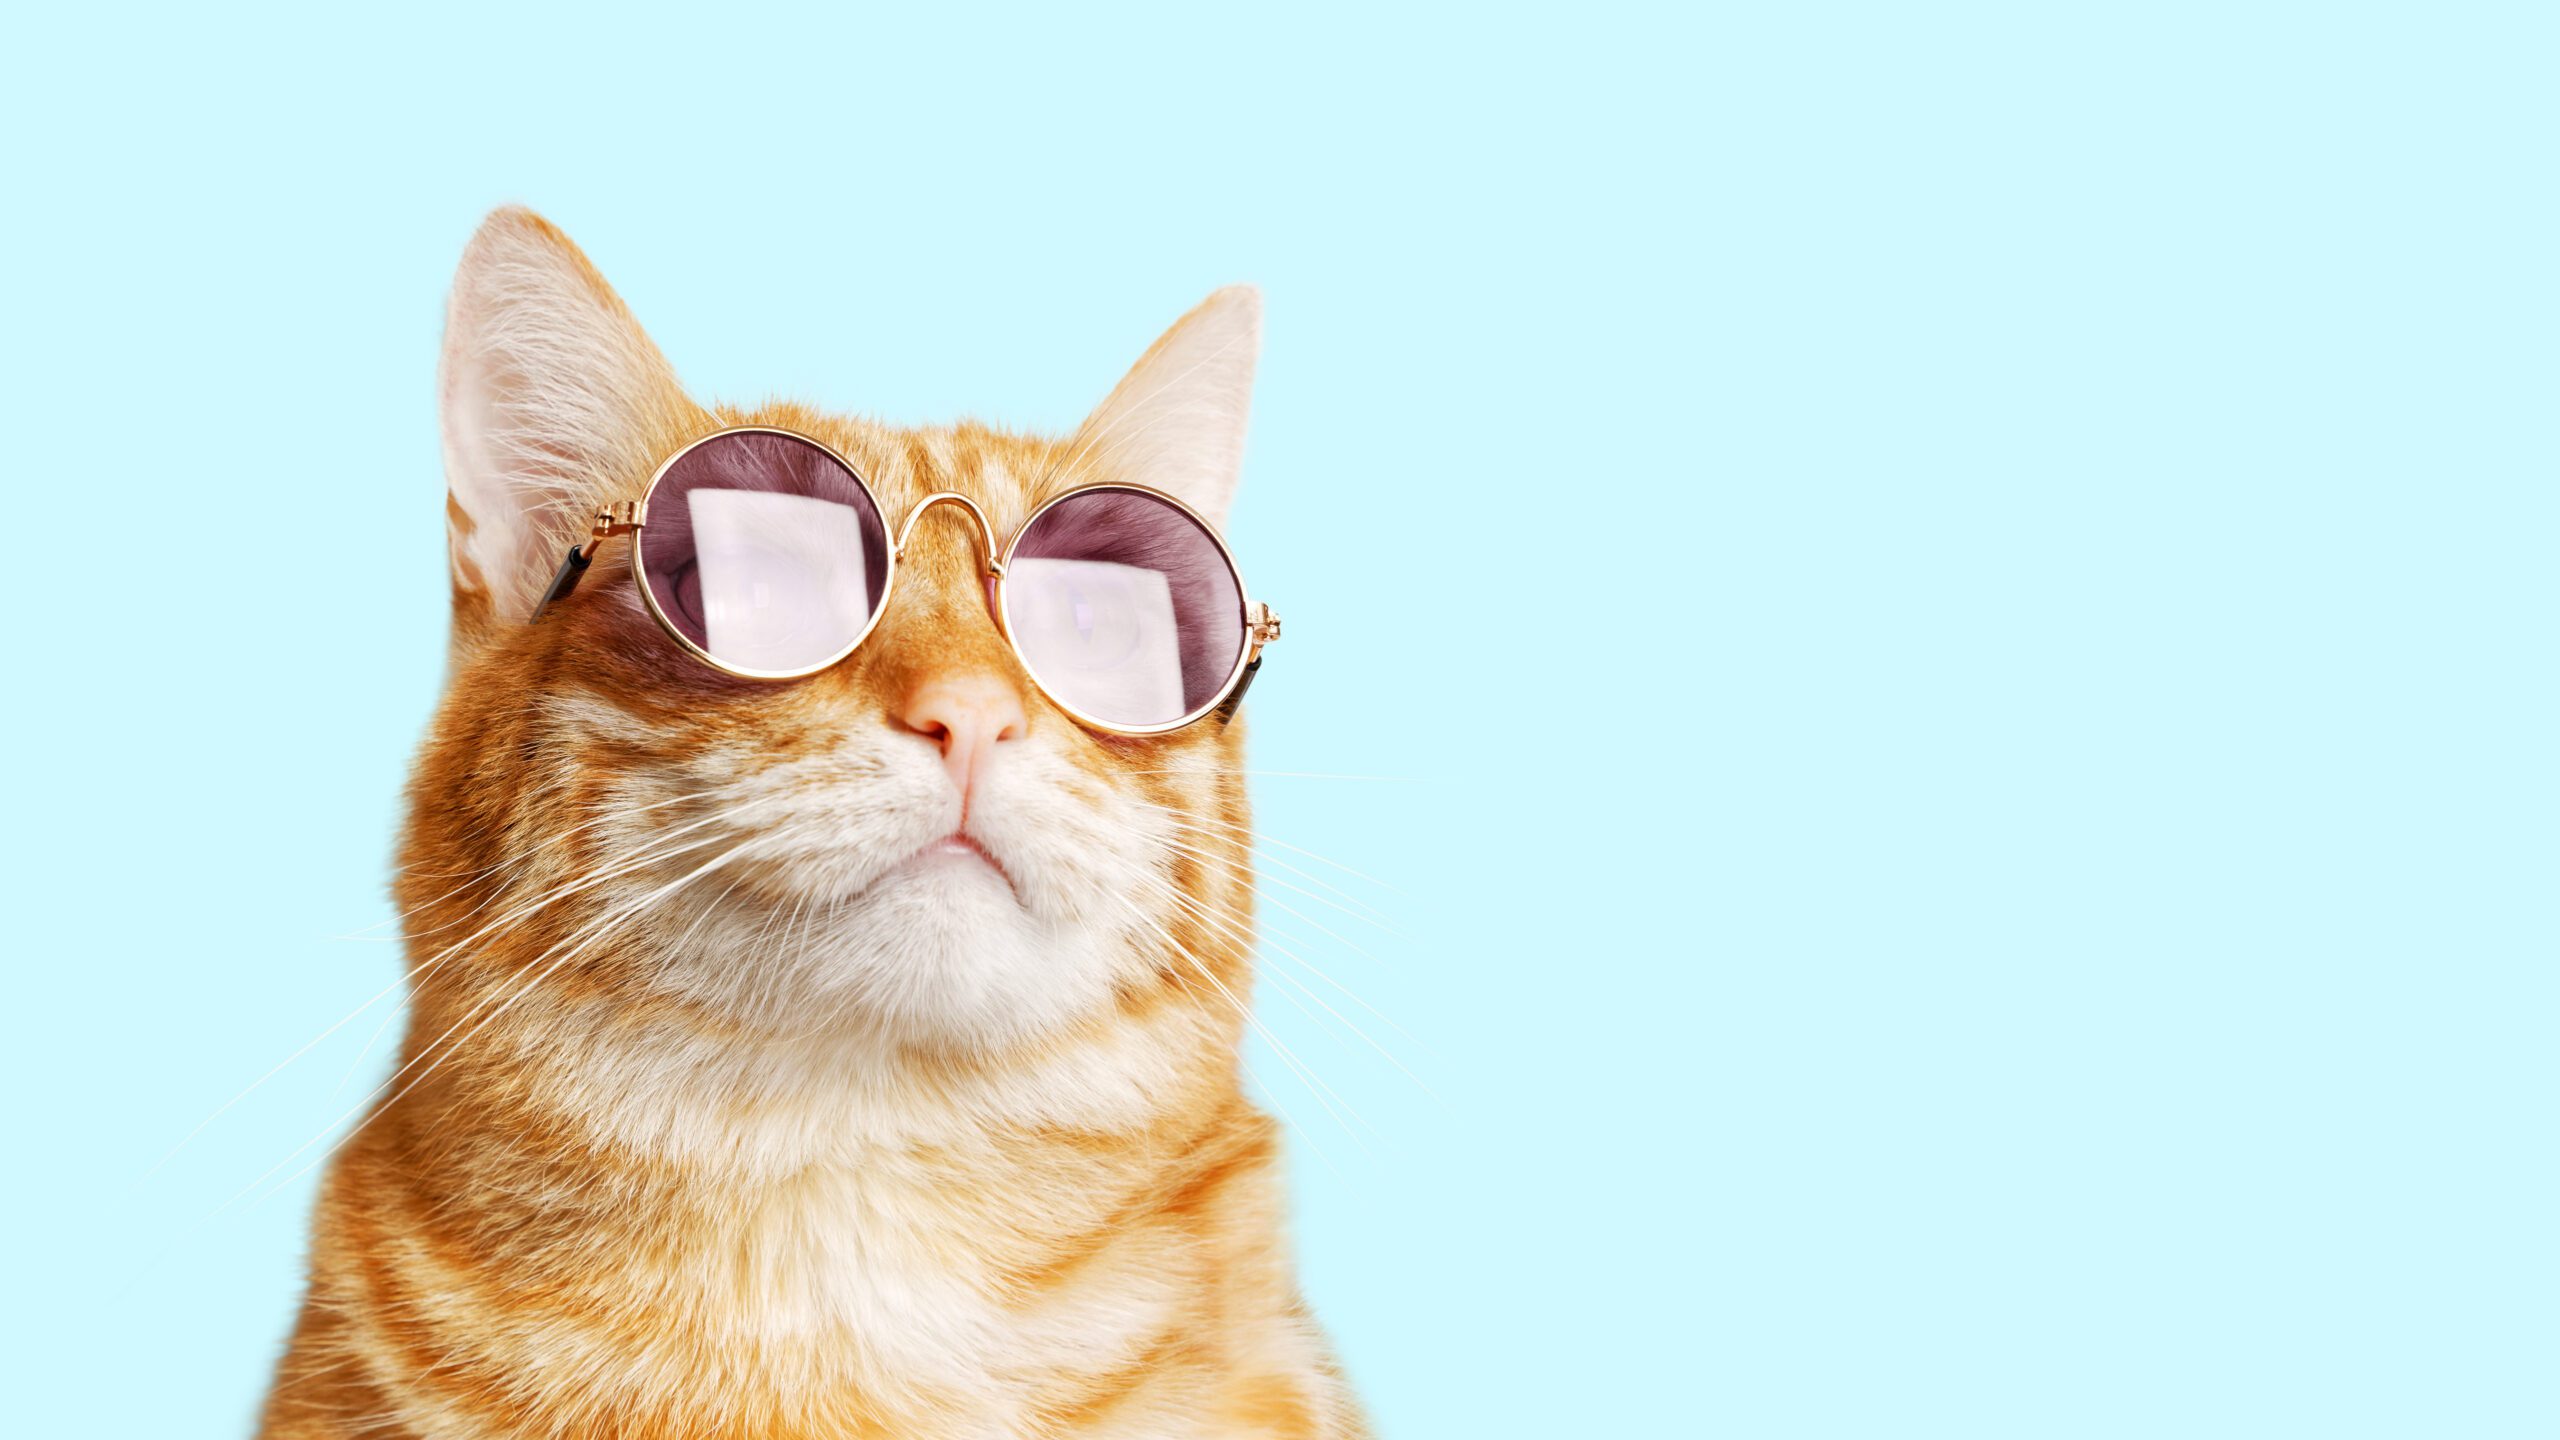 Orange tabby cat wearing a cool pair of sunglasses - maybe having just eaten some catnip!